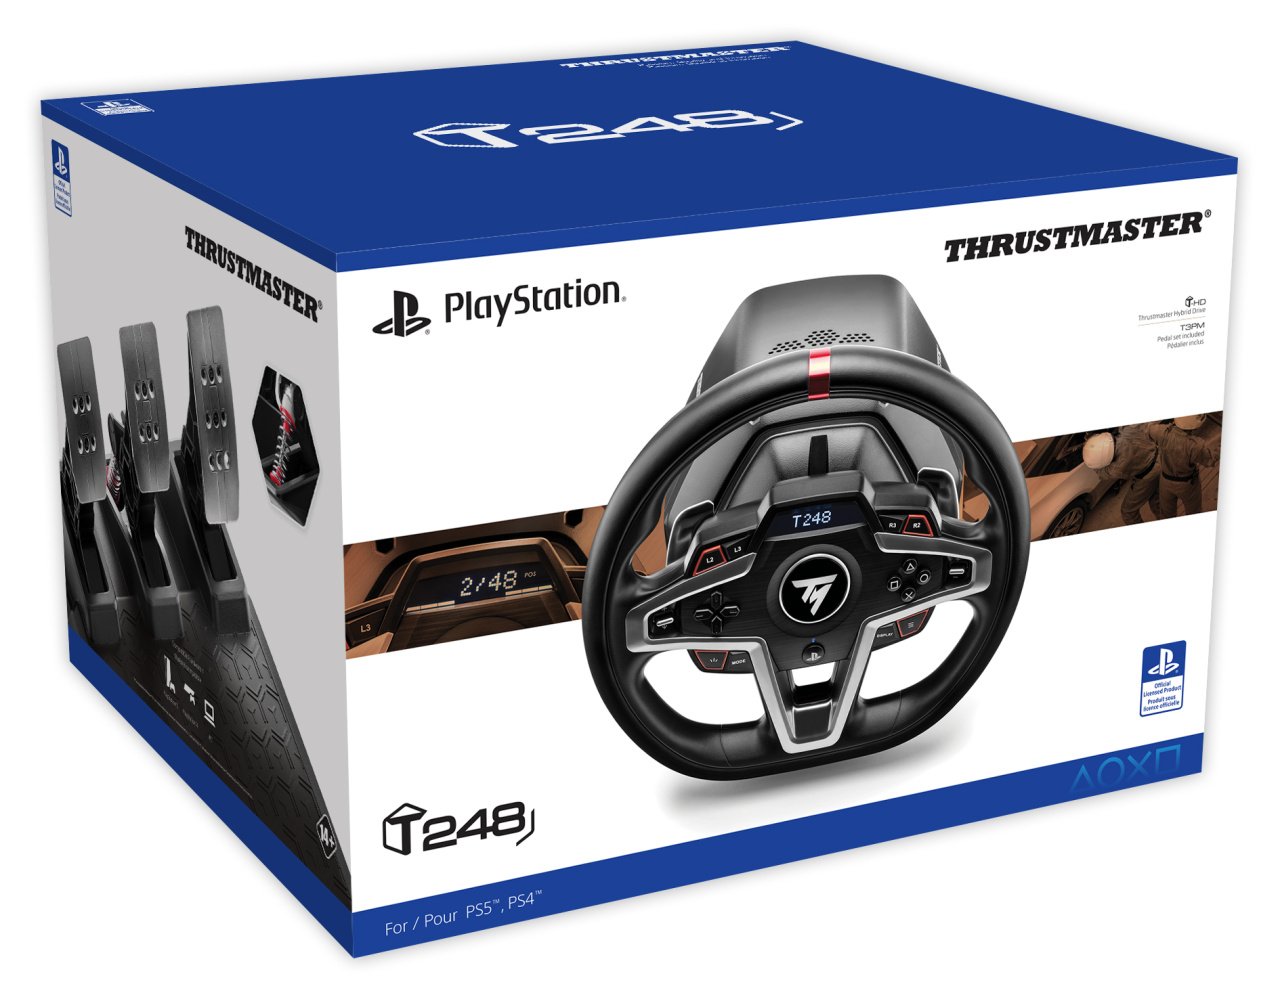 THRUSTMASTER T248 MASTER TRACK STEERING WHEEL ALL GAME SUPPORT PC